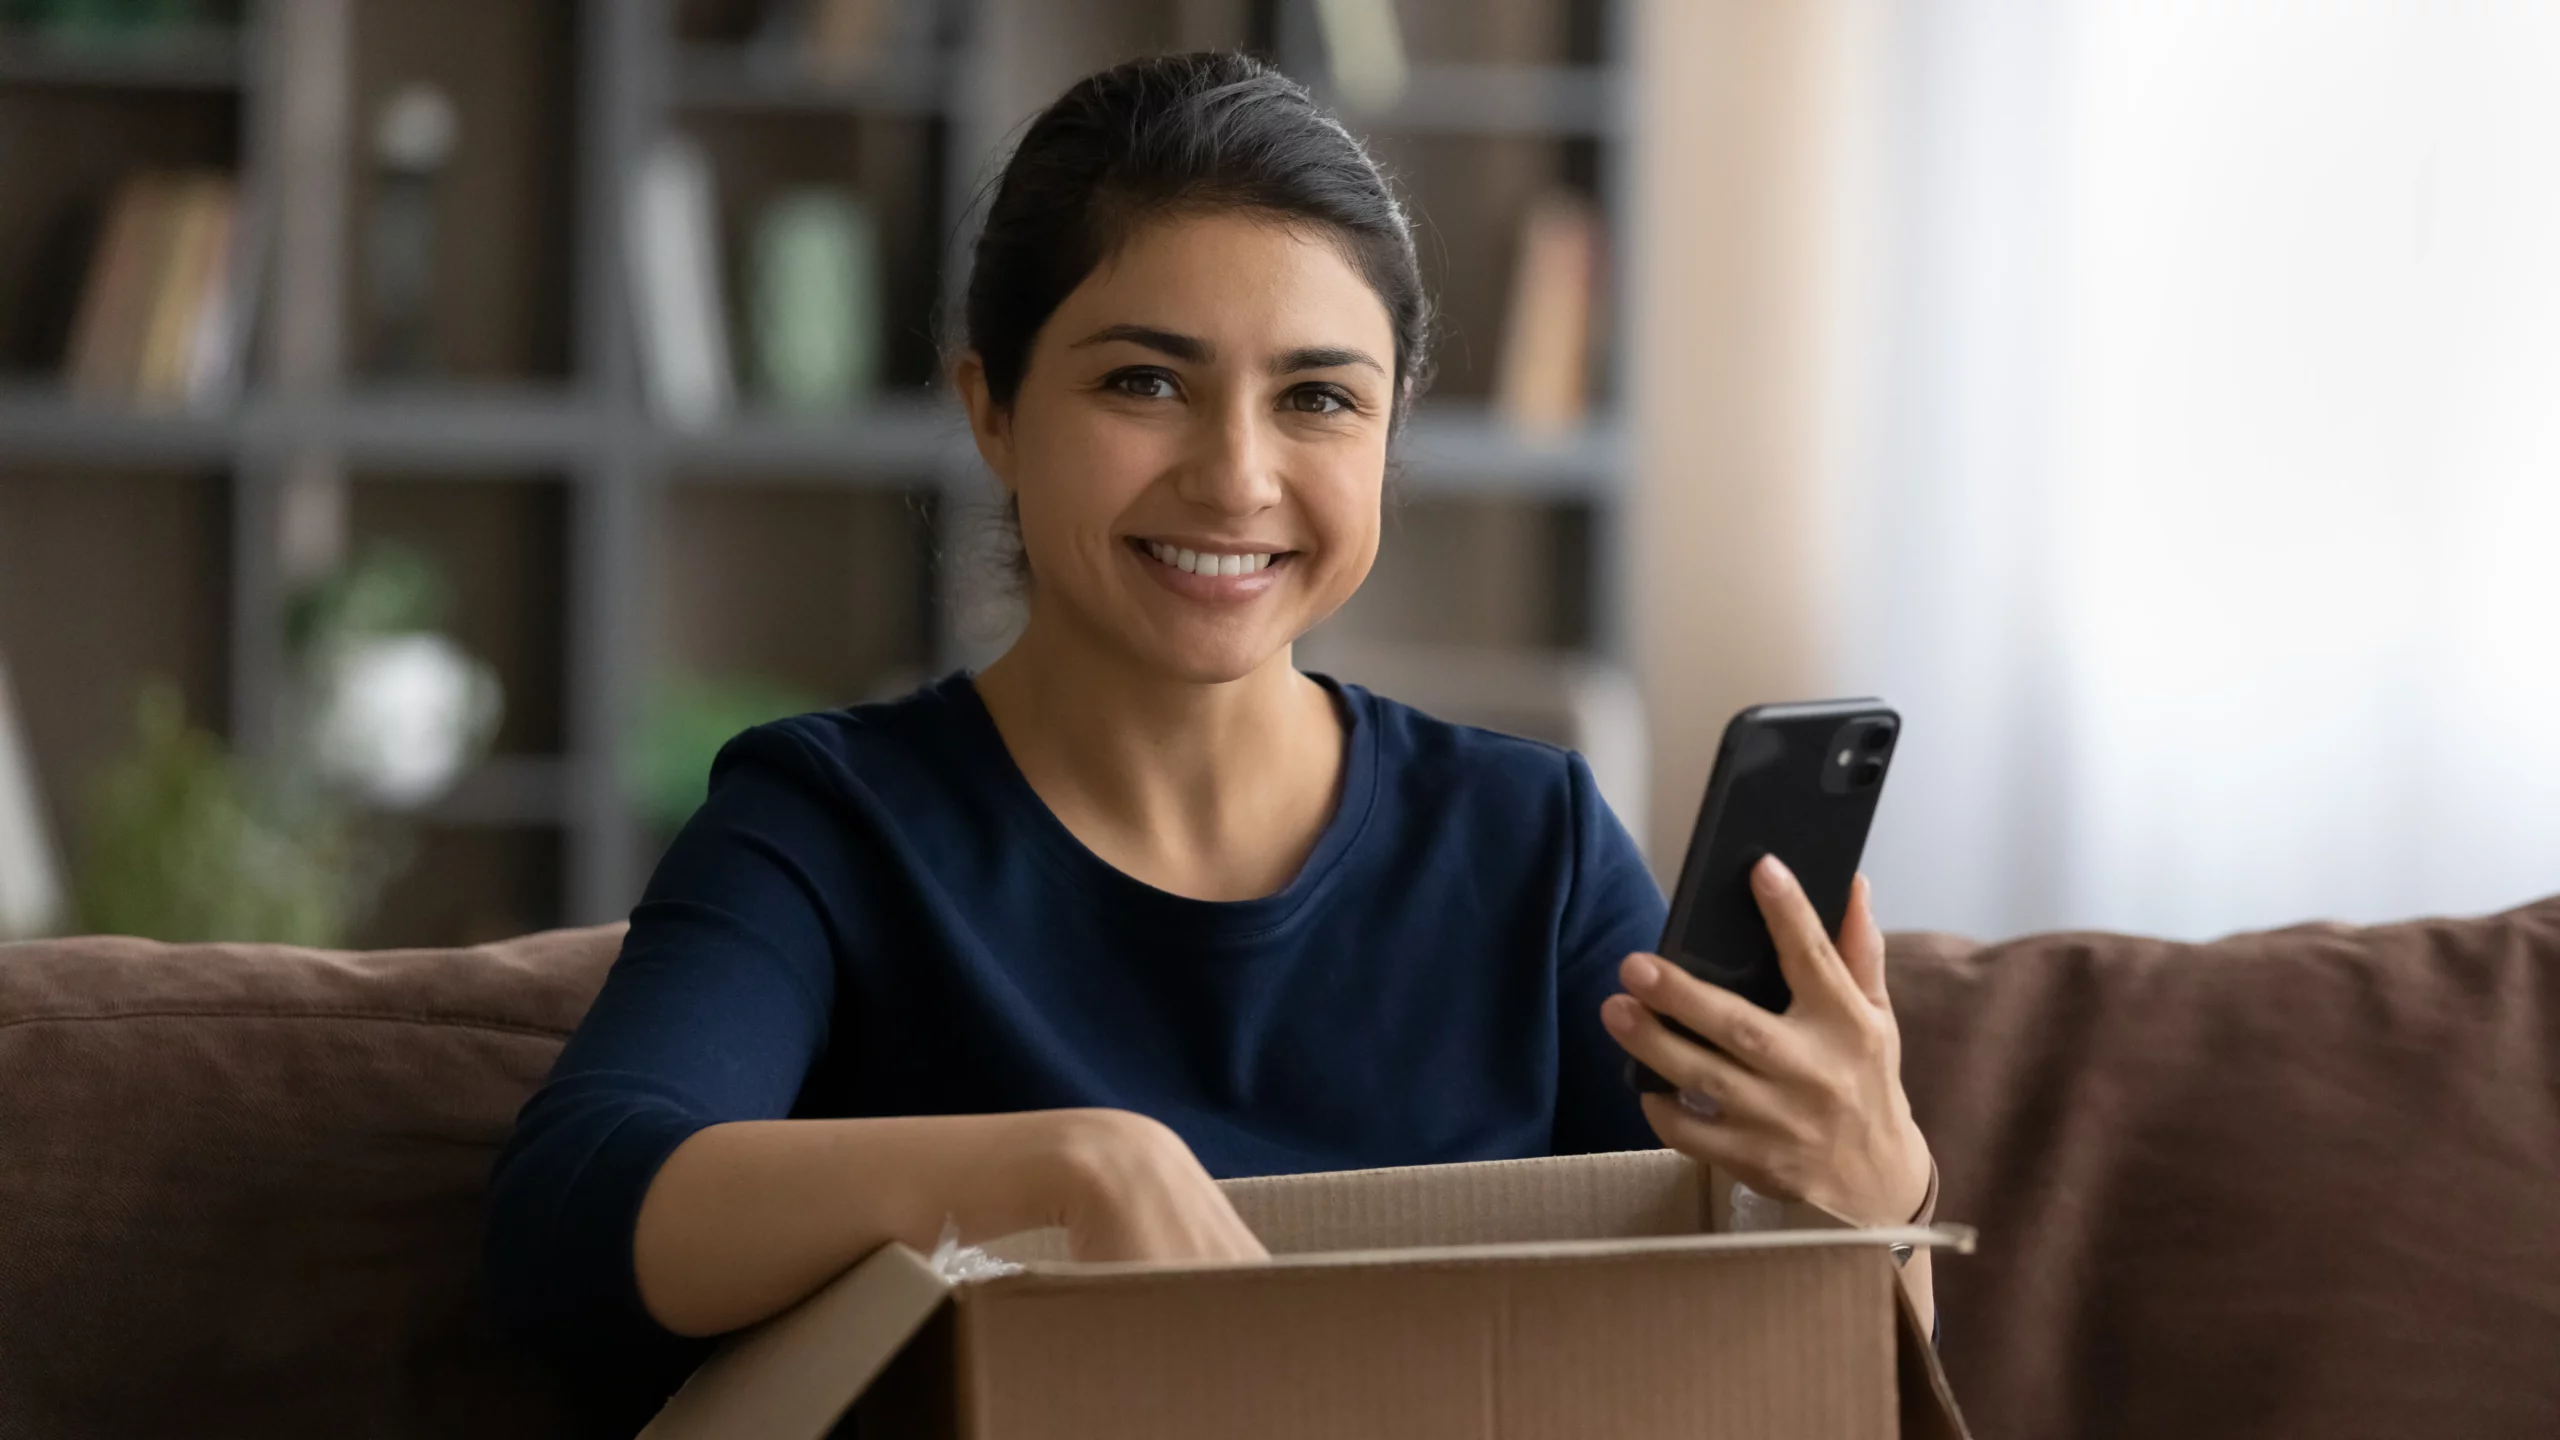 smiling women holding a phone with her other hand inside an open cardboard box